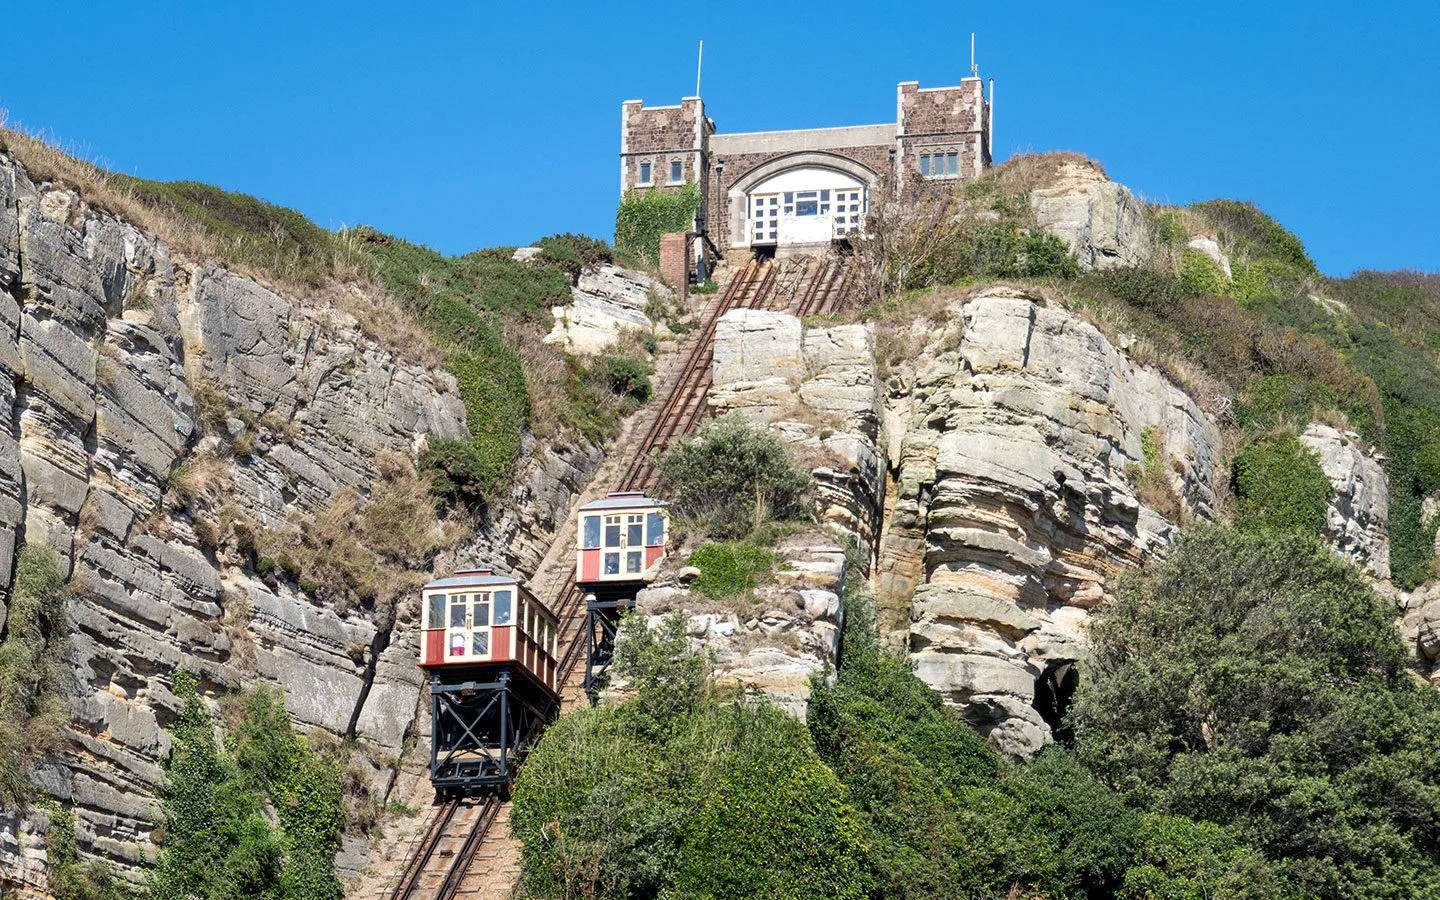 The East Hill Lift funicular in Hastings